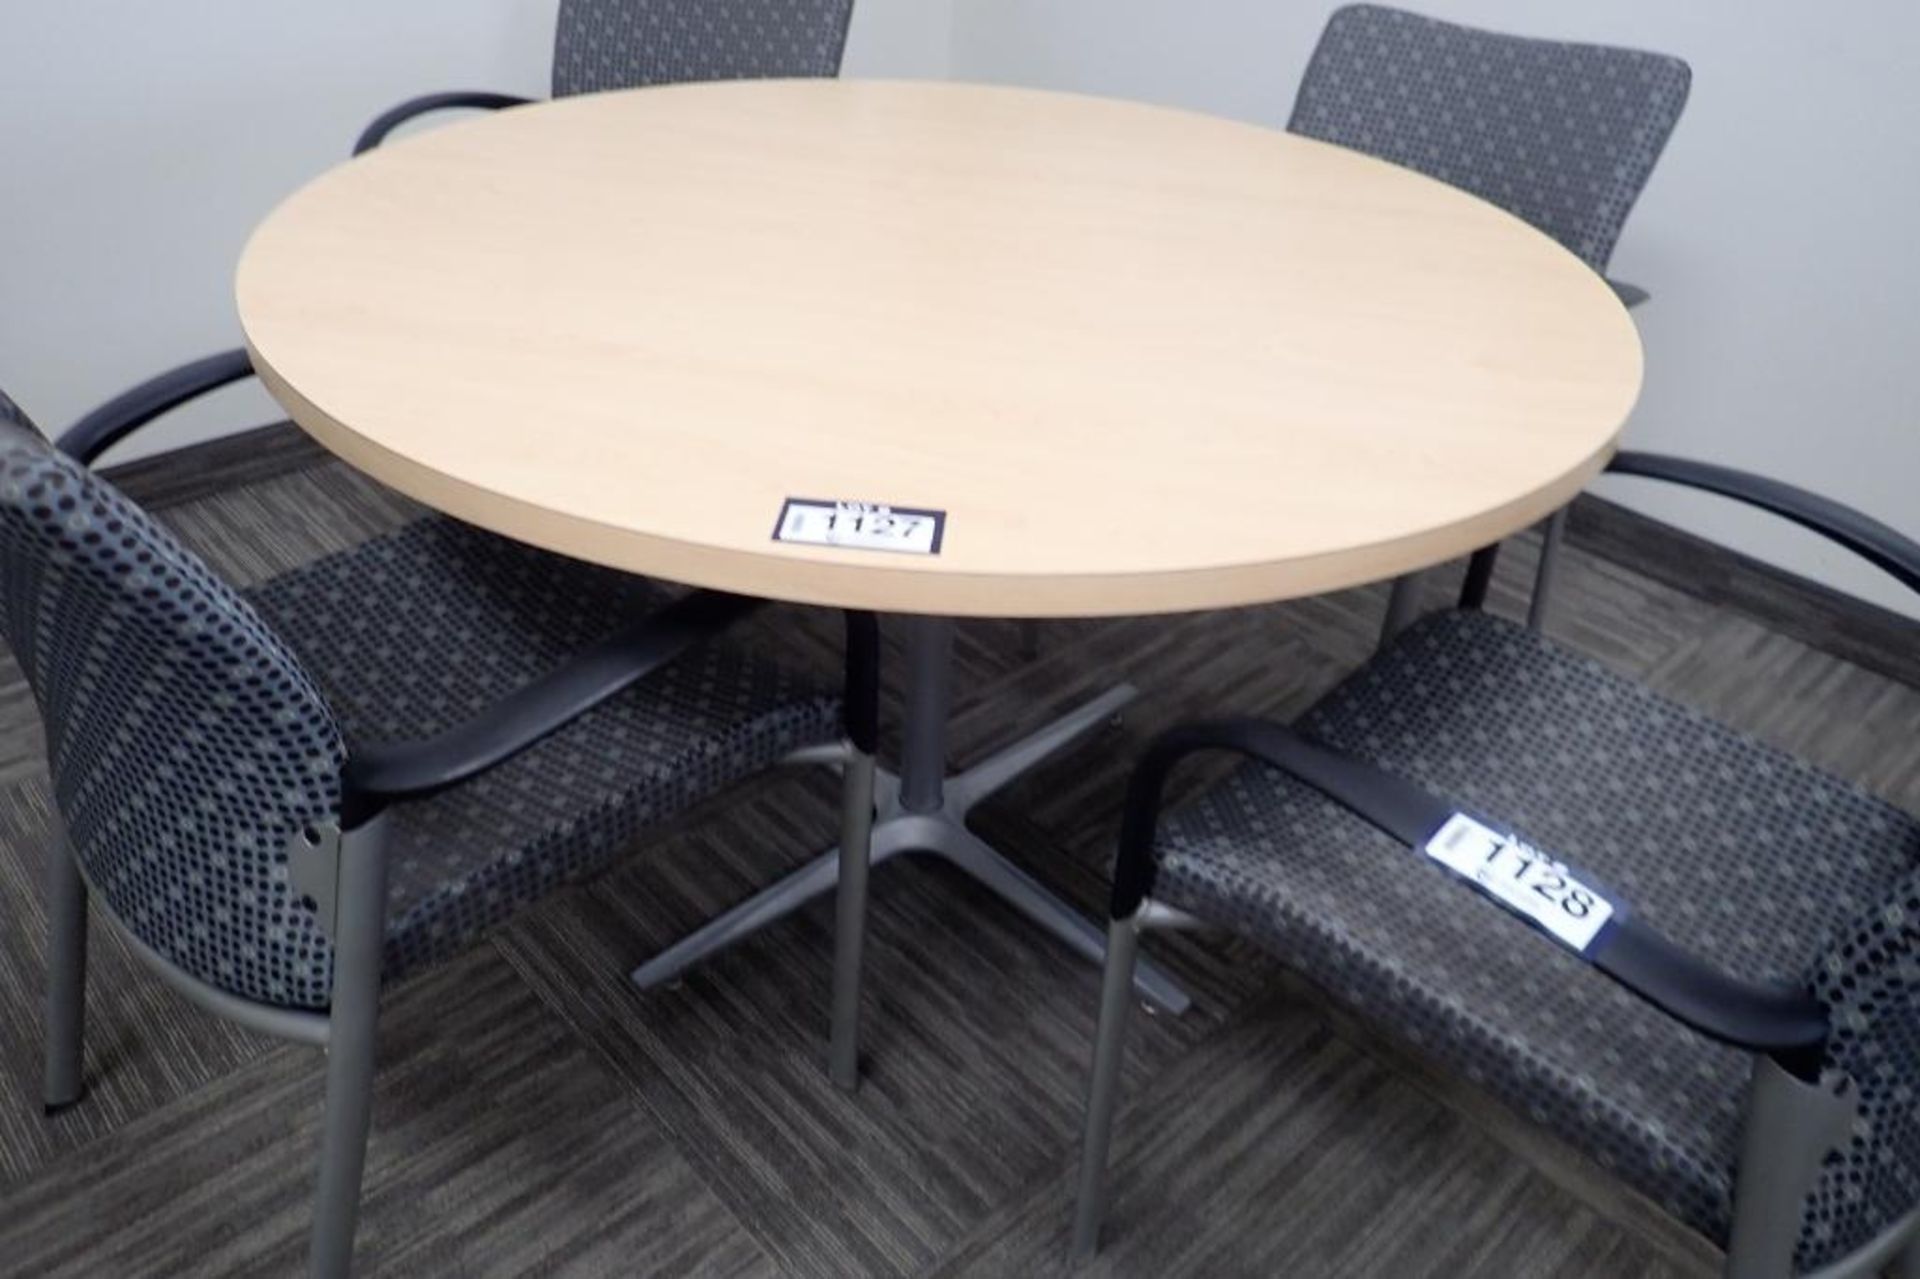 48" Round Meeting Table.